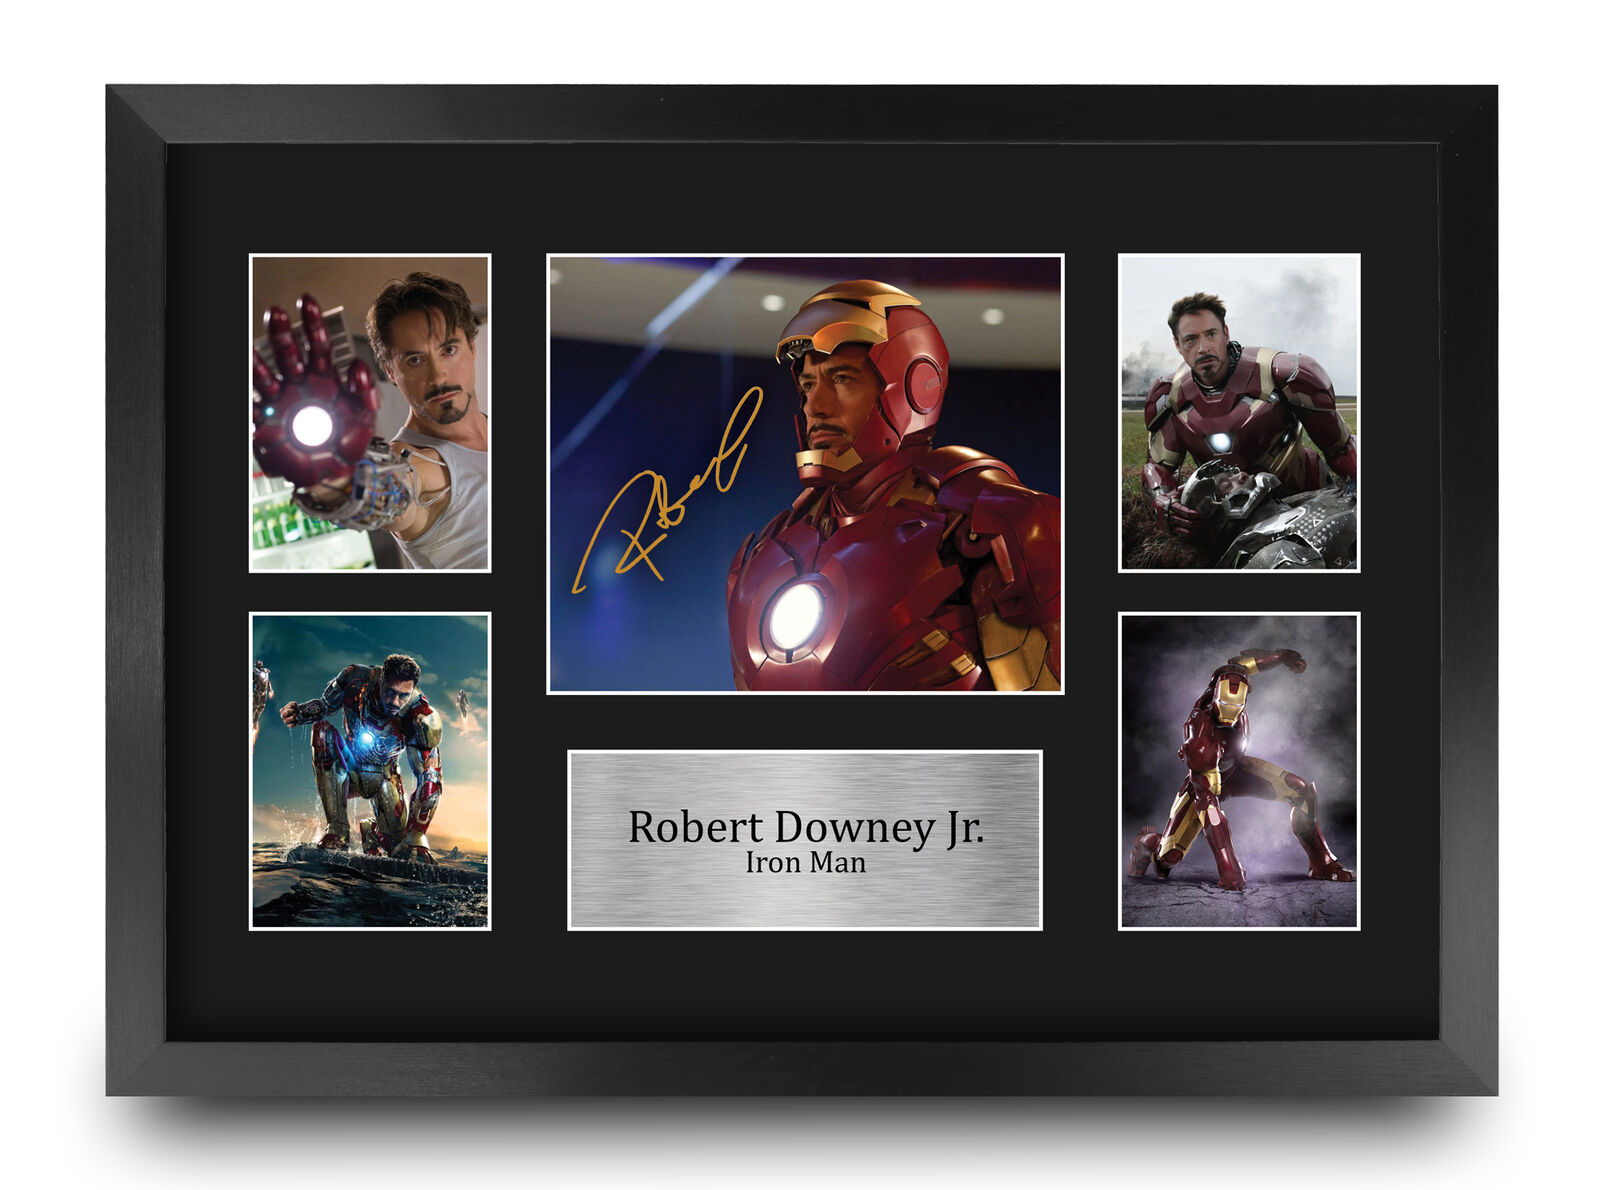 Robert Downey Jr Gift Idea Framed Autograph A3 Picture Print to Movie Fans